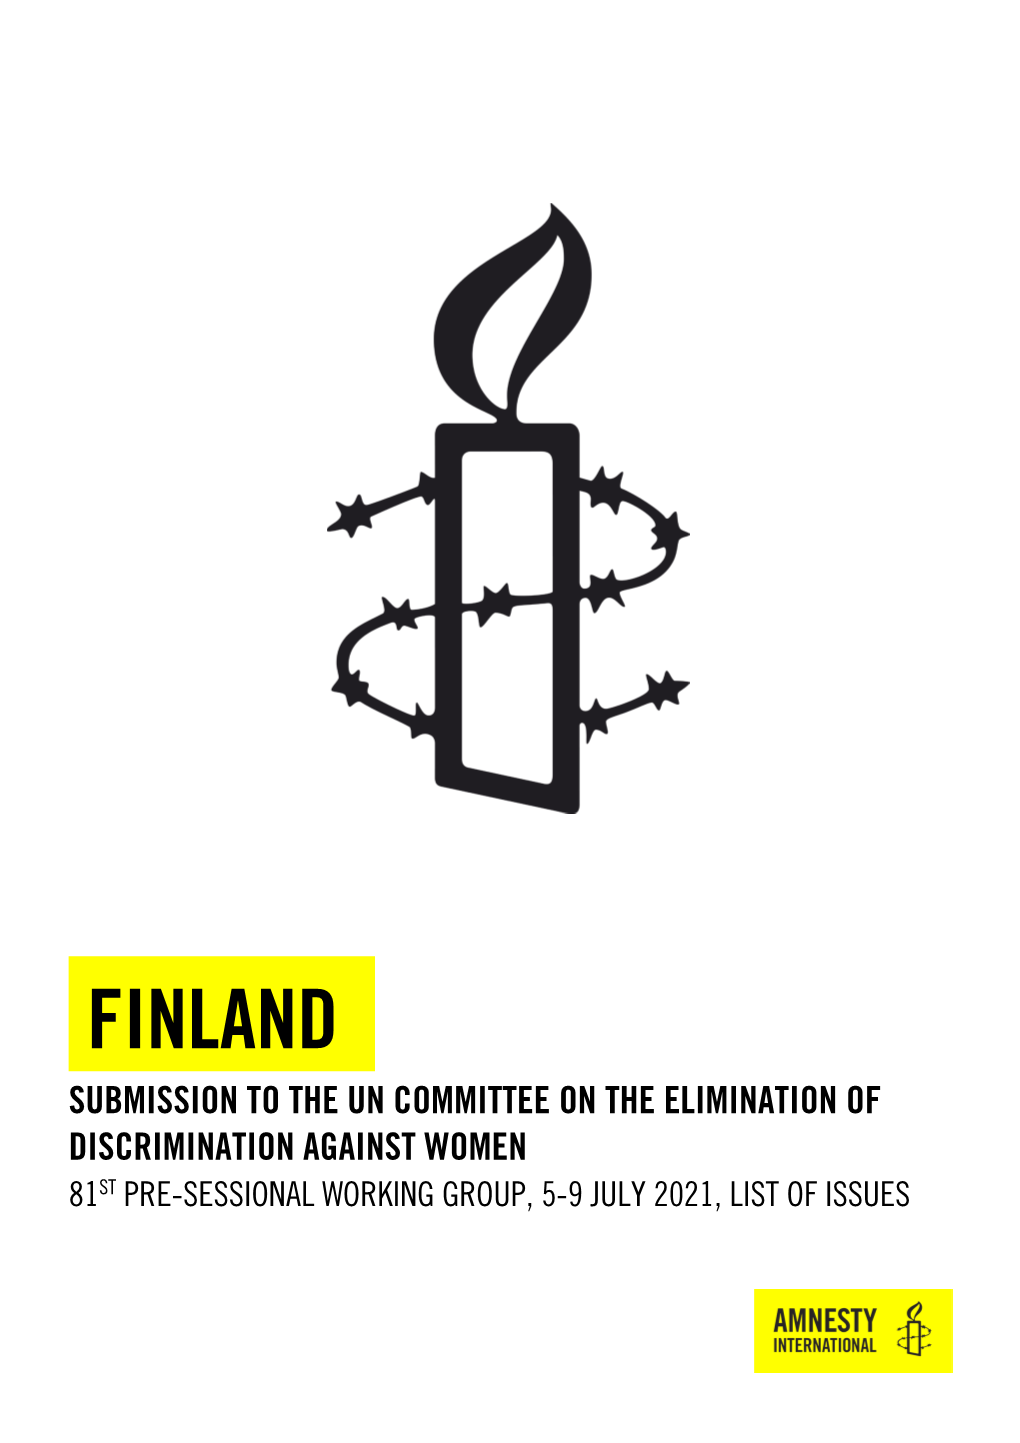 Finland Submission to the Un Committee on the Elimination of Discrimination Against Women 81St Pre-Sessional Working Group, 5-9 July 2021, List of Issues